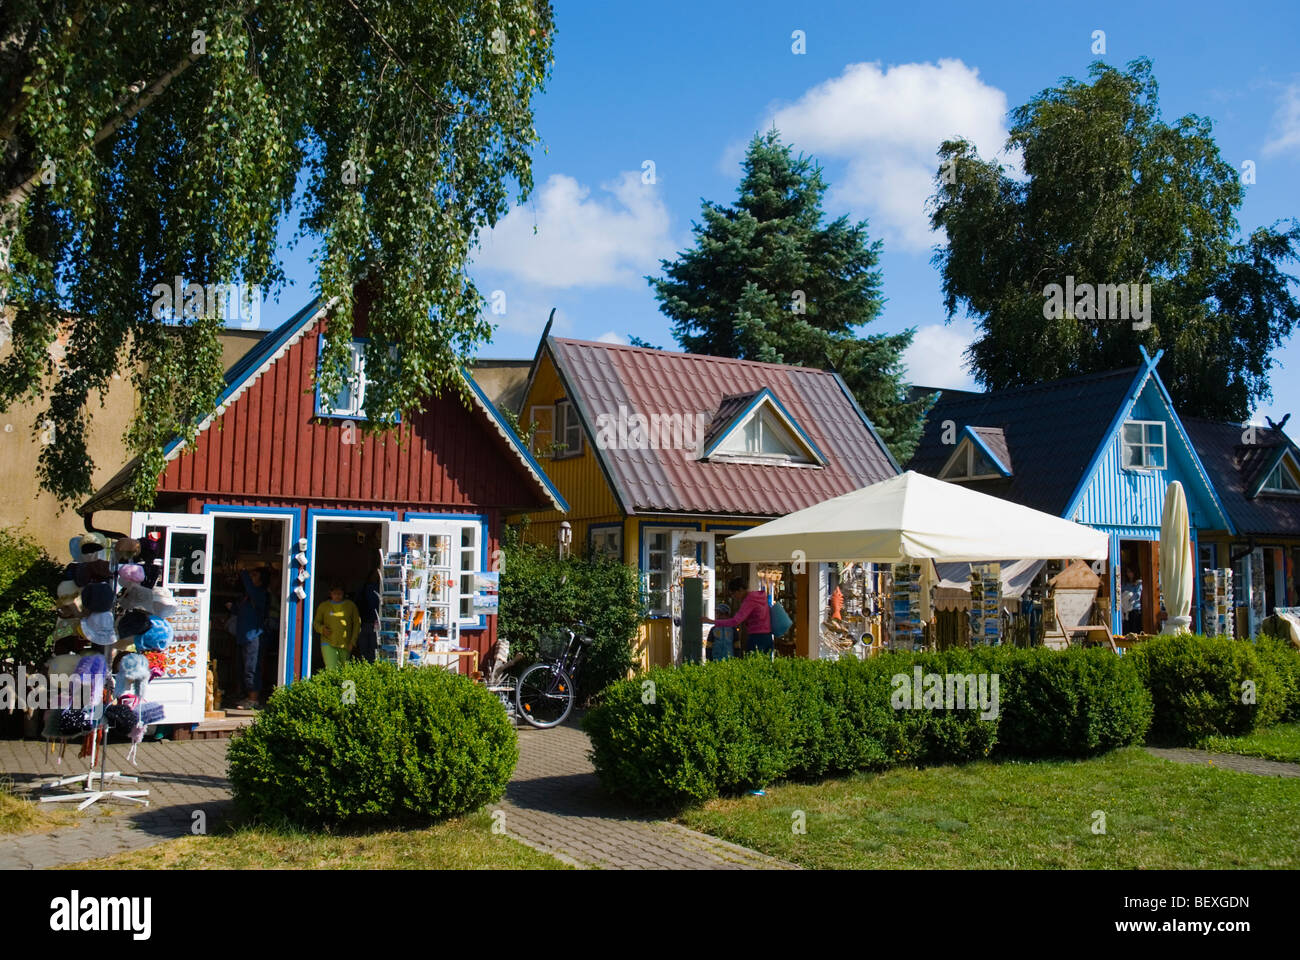 Shops selling souvenirs in Nida the Curonian Spit Lithuania Europe Stock Photo